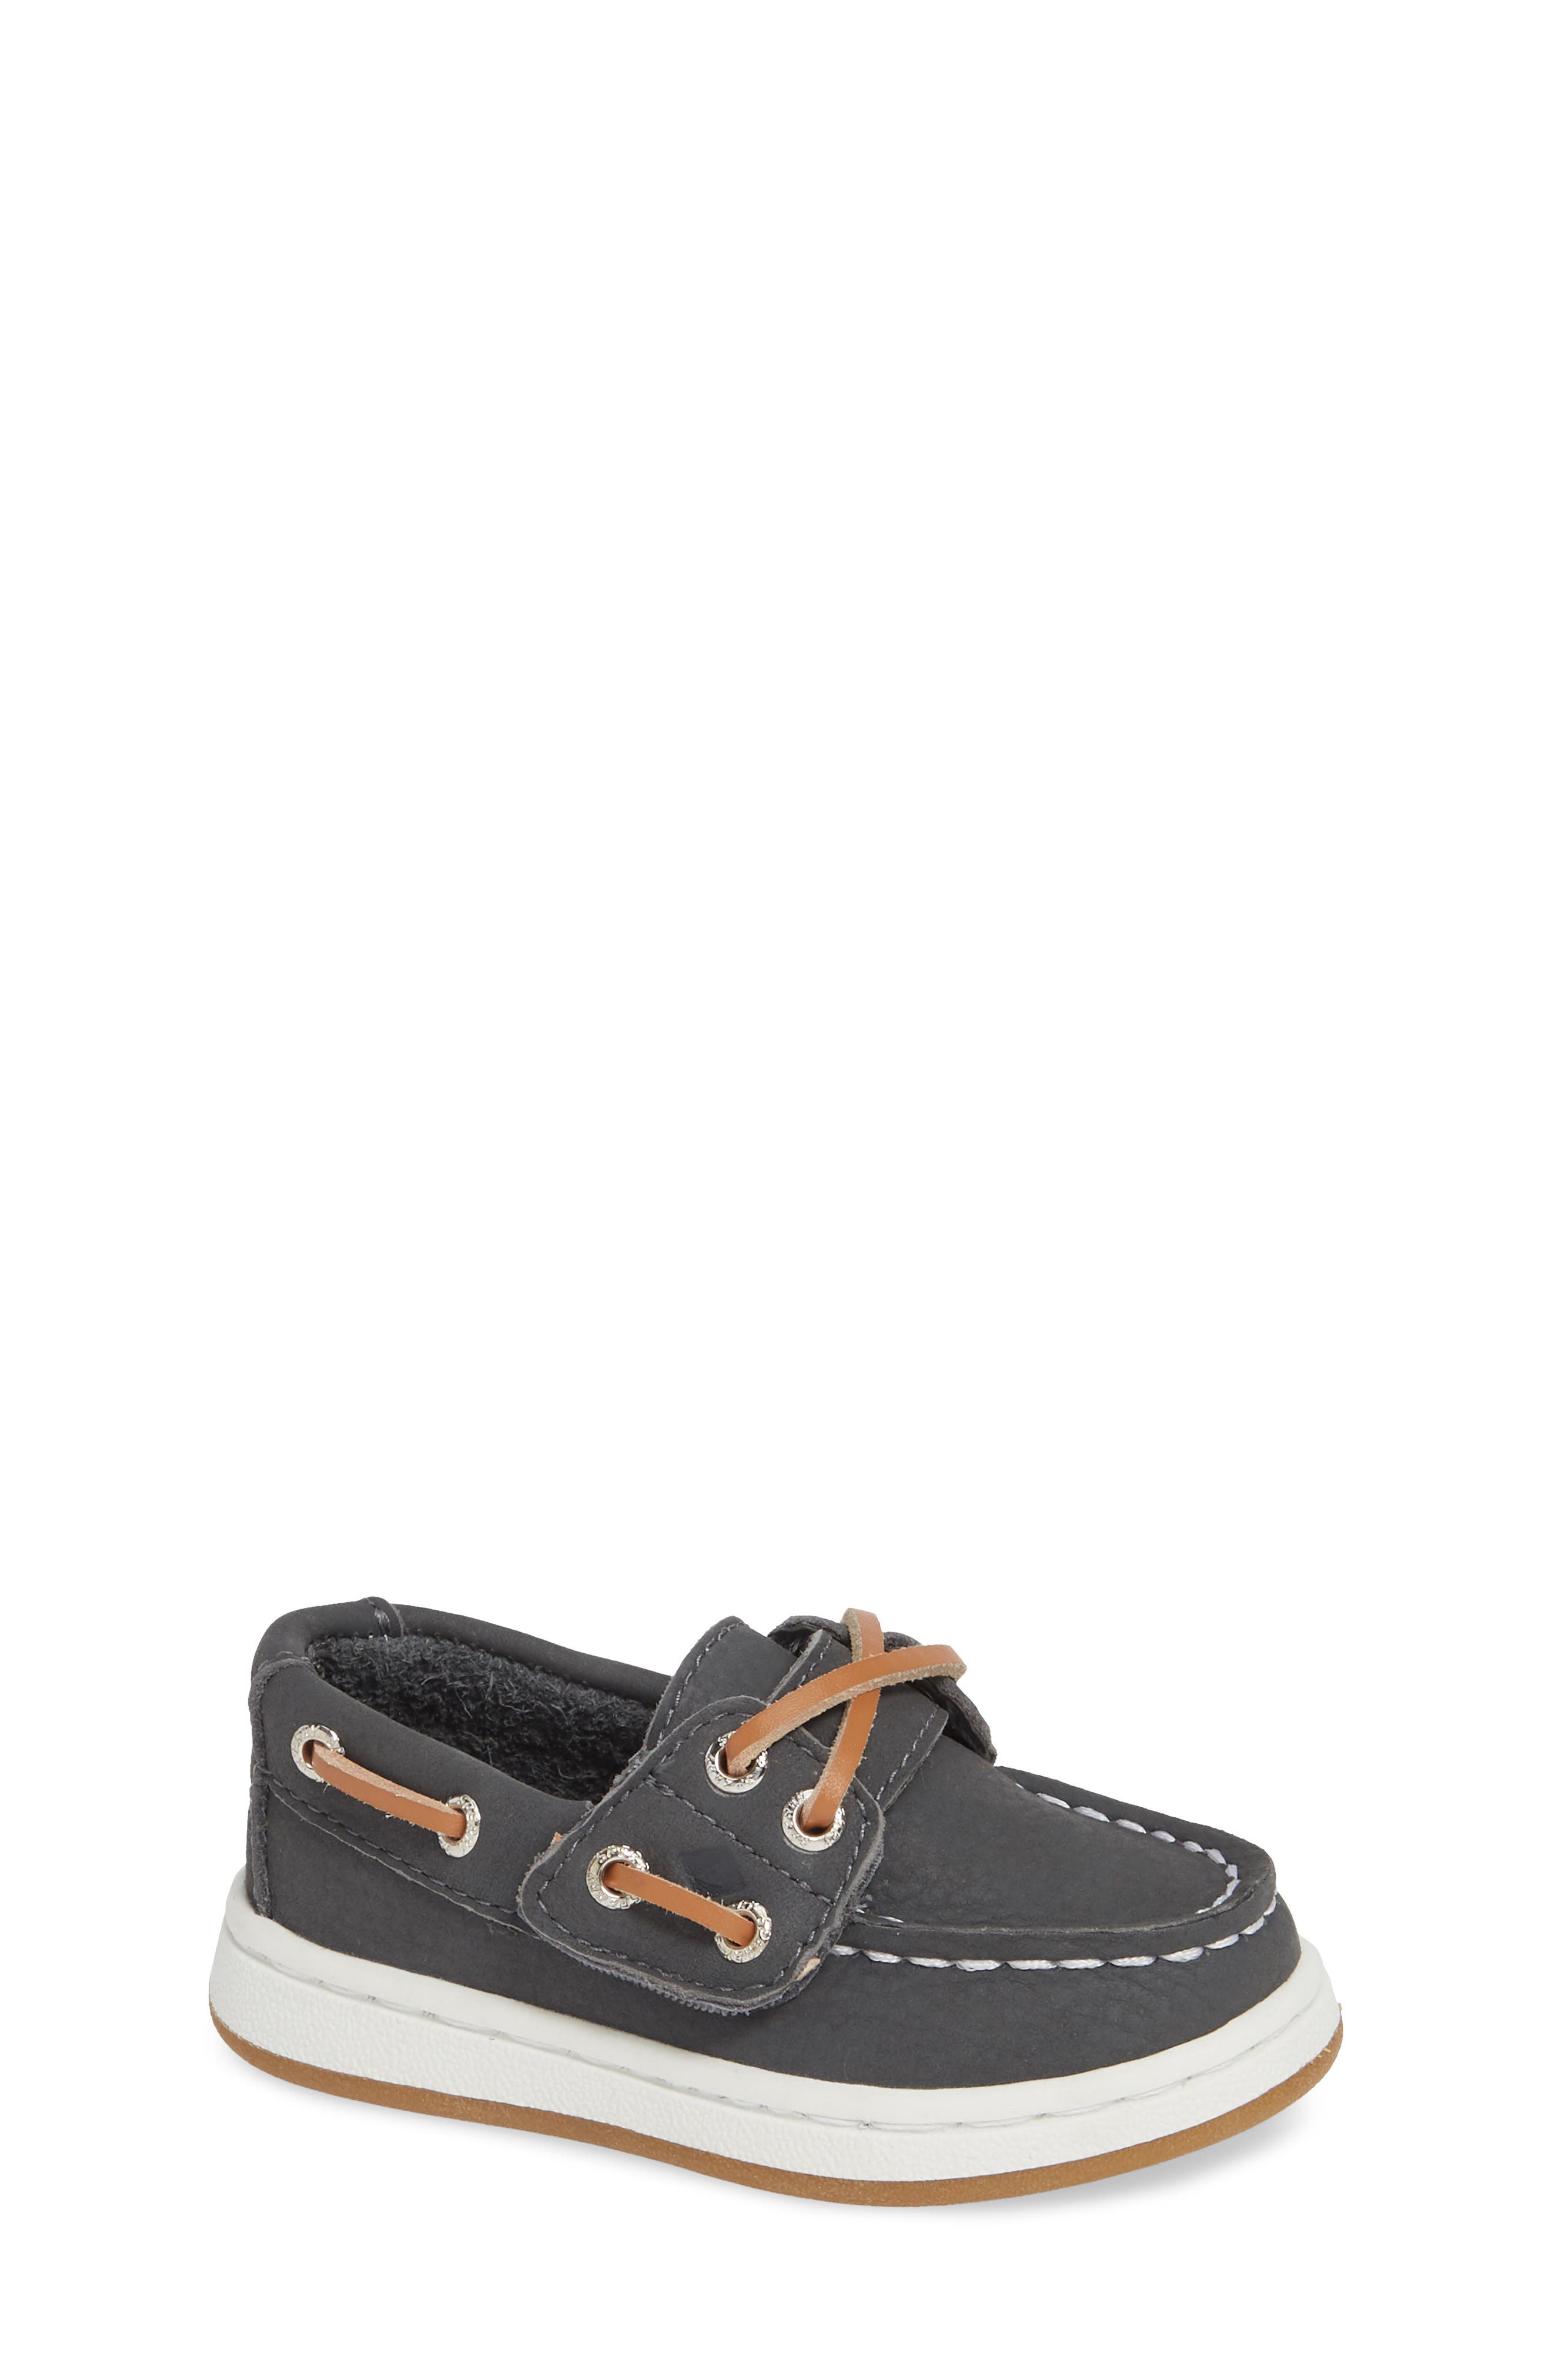 sperry infant size chart